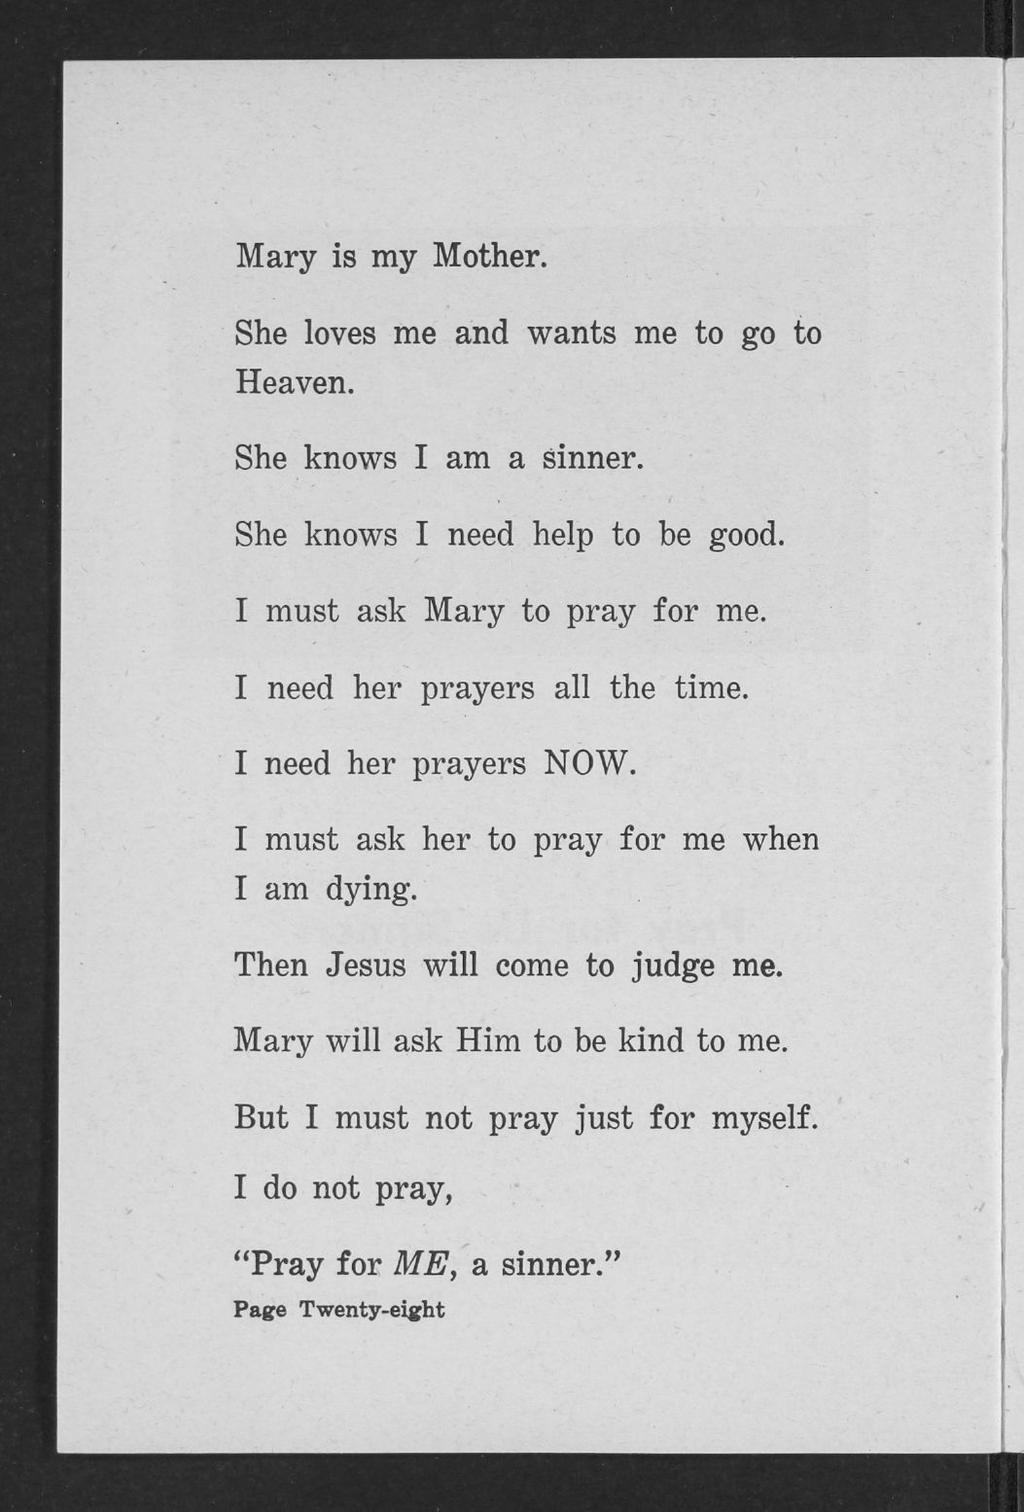 Mary is my Mother. She loves me and wants me to go to Heaven. She knows I am a sinner. She knows I need help to be good. I must ask Mary to pray for me. I need her prayers all the time.